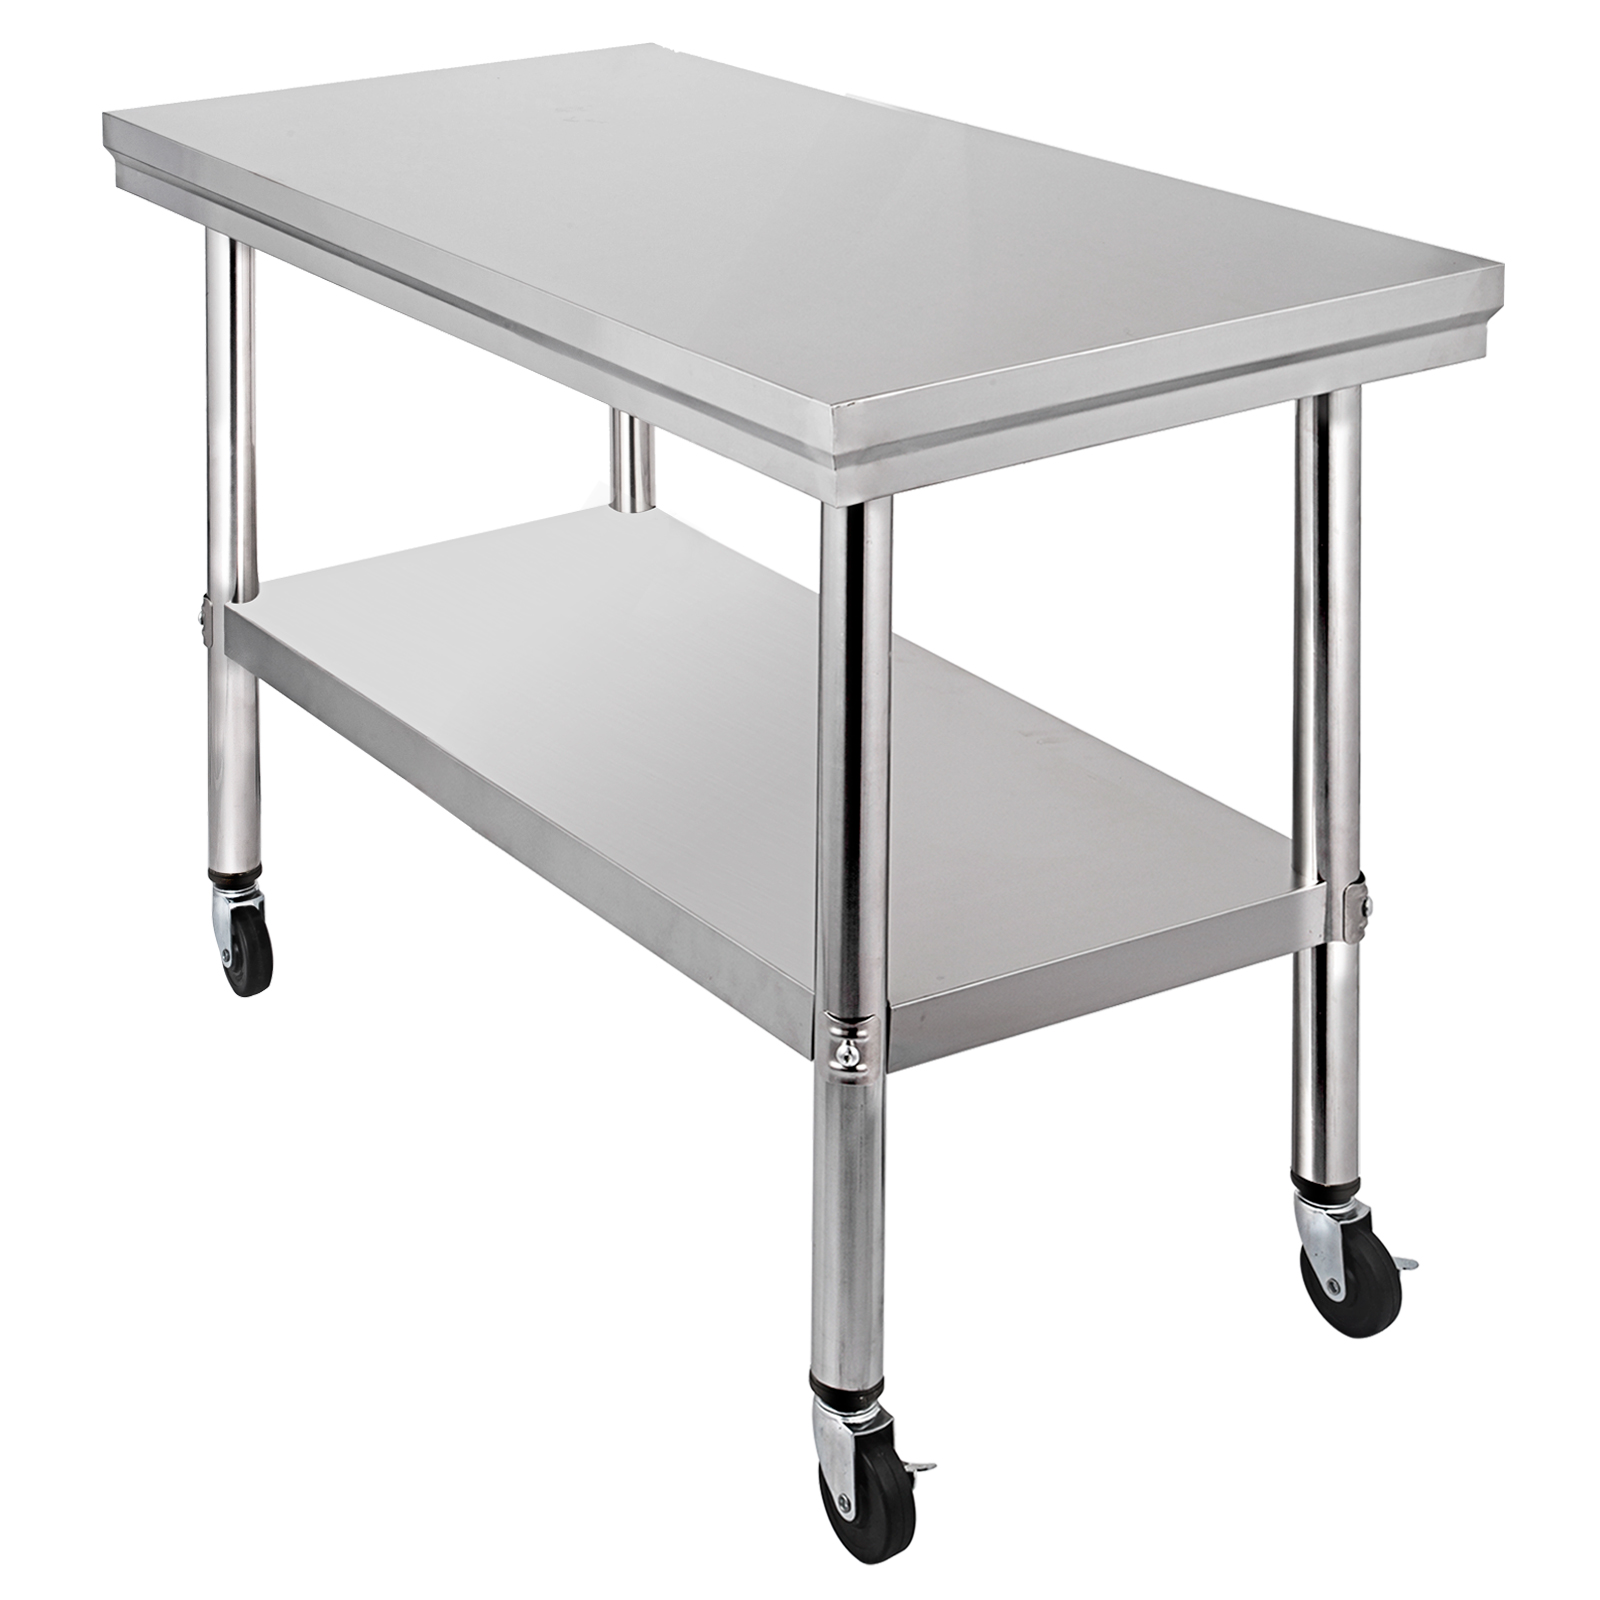 30" x 24" Stainless Steel Work Prep Table with Wheels Kitchen Stainless Steel Work Table With Wheels